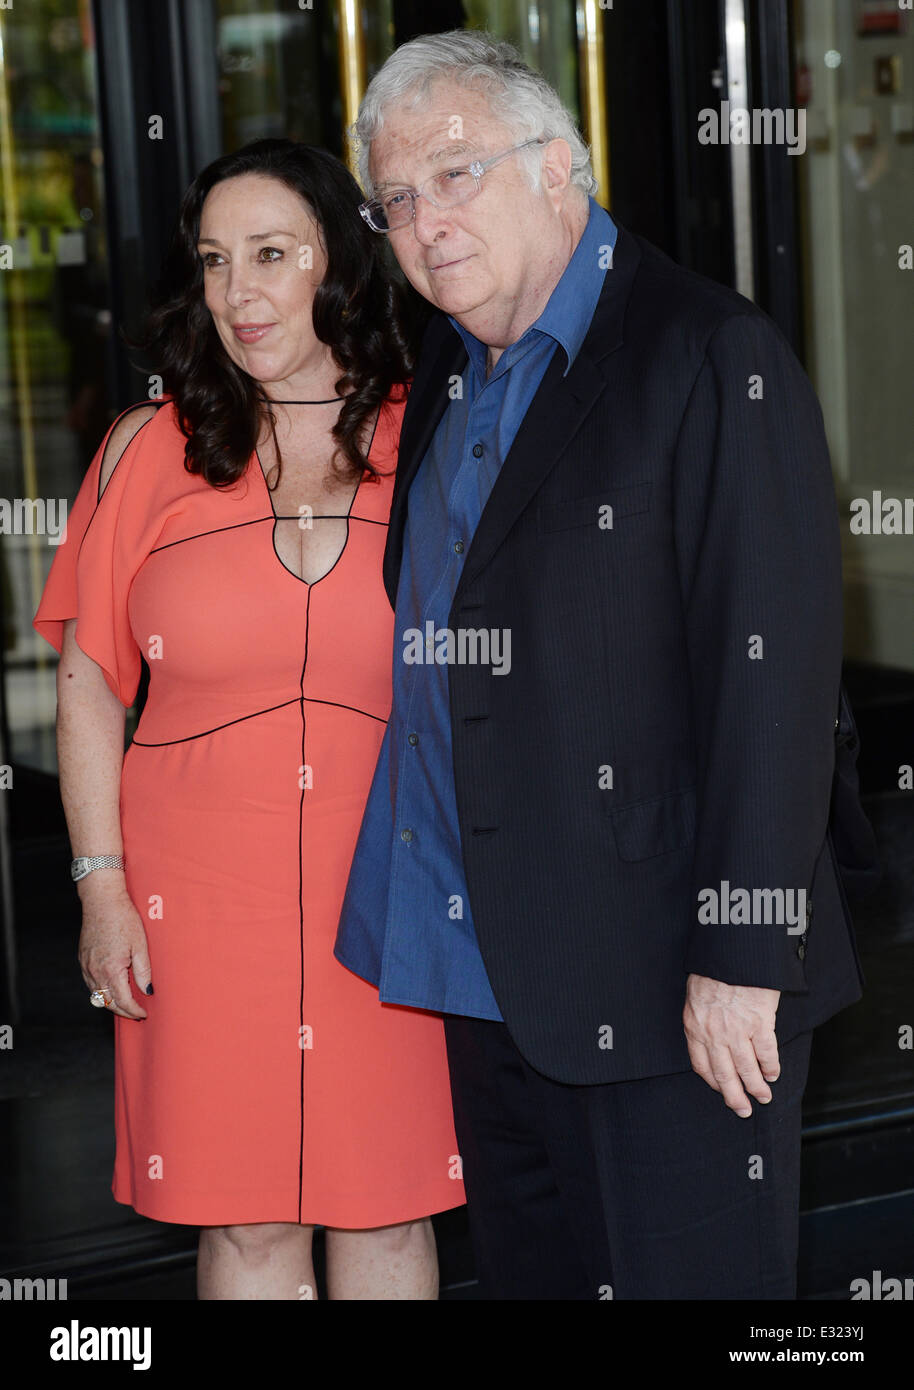 The Ivor Novello Awards held at the Grosvenor House - Arrivals  Featuring: Barry Newman Where: London, United Kingdom When: 16 M Stock Photo